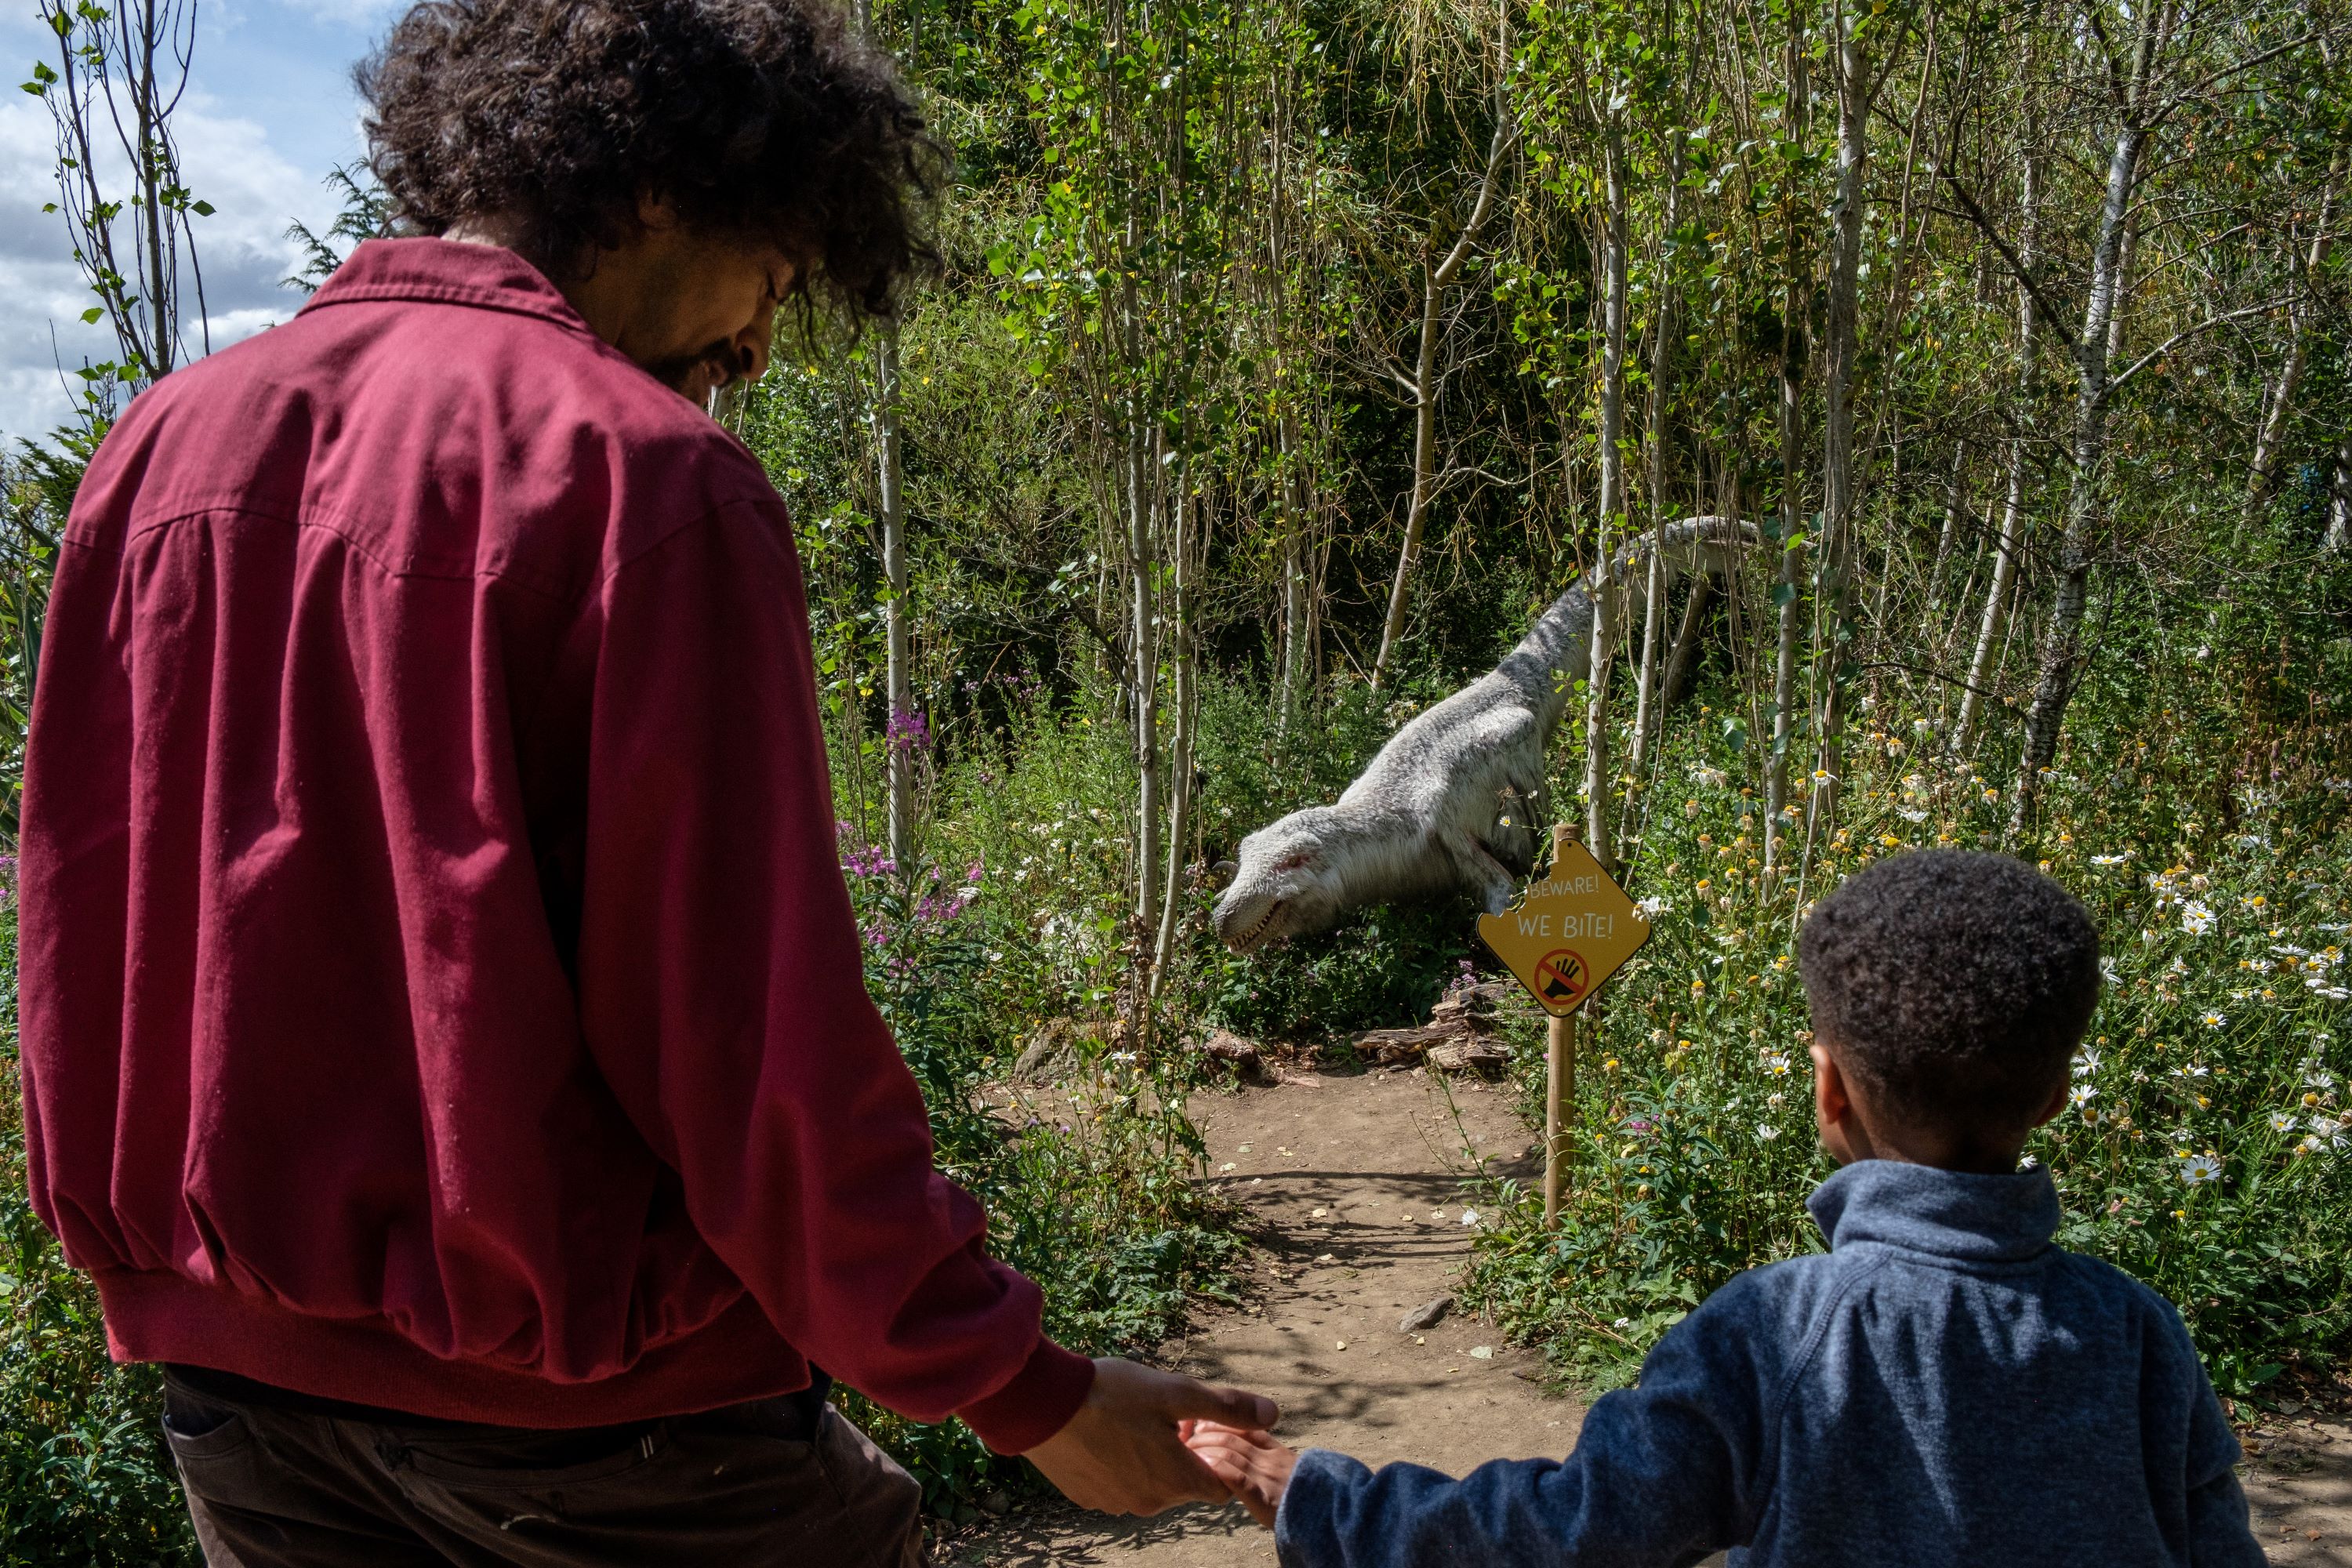 dad and child holding hands looking at dinosaur IMAGE: Robin Mair 2022